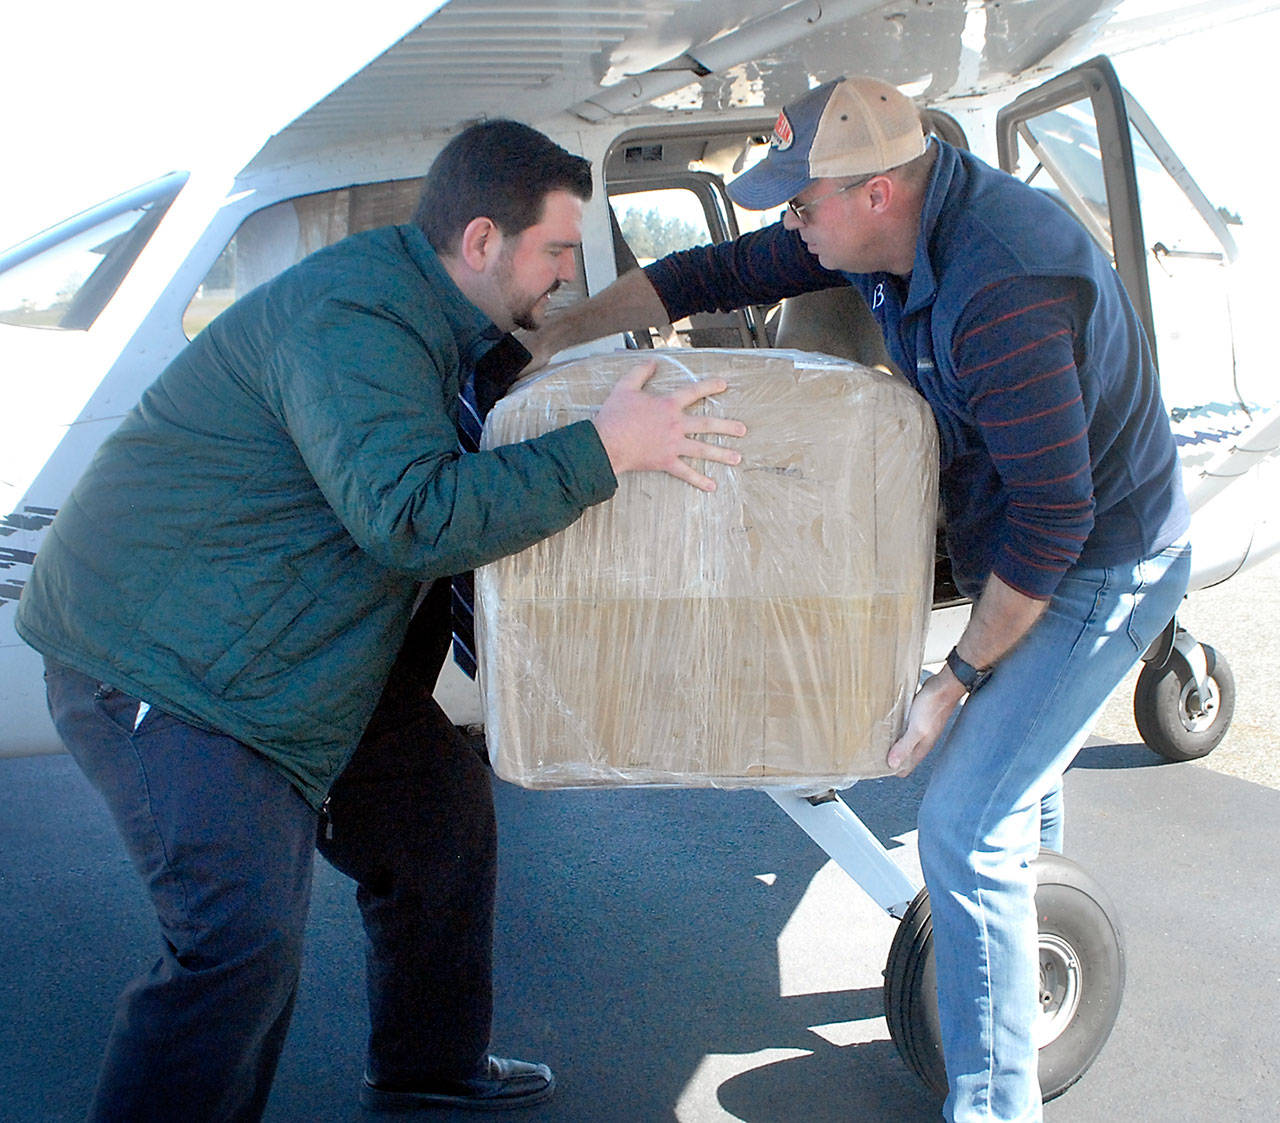 Bastian Hardtke, purchasing manager at Olympic Medical Center, left, takes a box from Boeing Employee’s Flying Association member Doug Weller of Seattle after two aircraft containing 30,000 surgical masks for the hospital arrived on Thursday at William R. Fairchild International Airport in Port Angeles on Thursday, April 16, 2020. (Keith Thorpe/Peninsula Daily News)